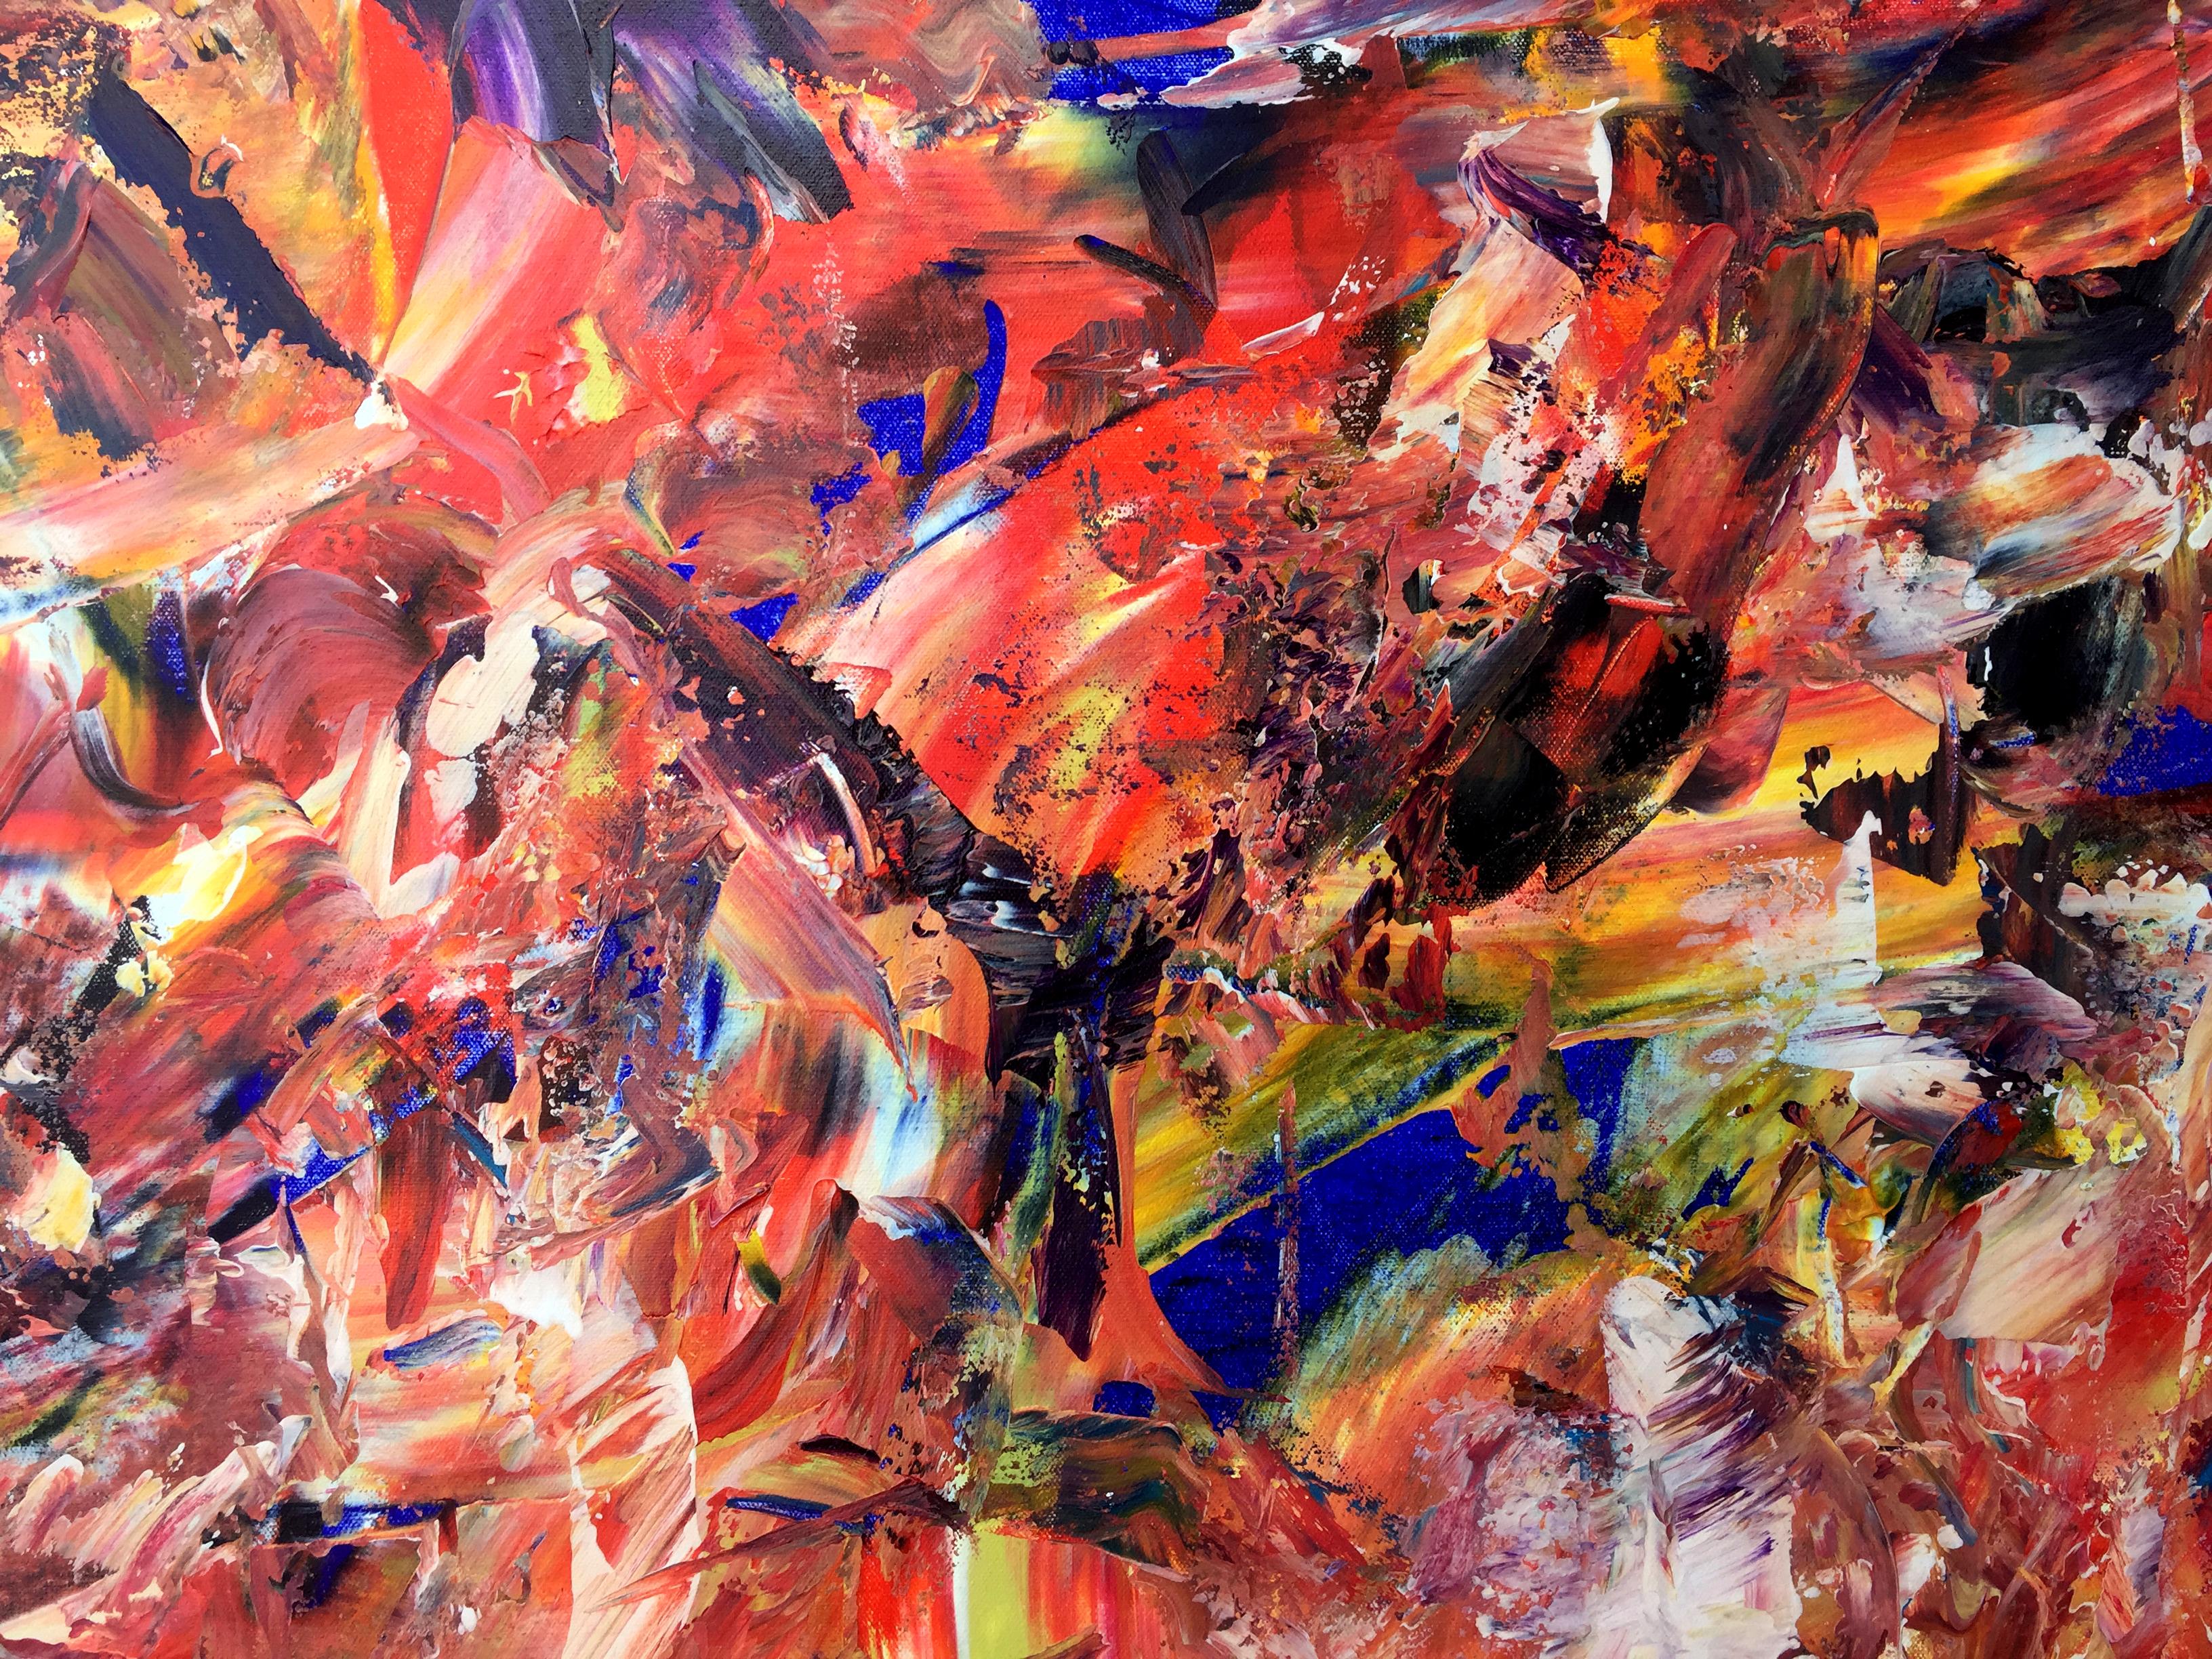 True Romance - Abstract Expressionist Painting by Estelle Asmodelle